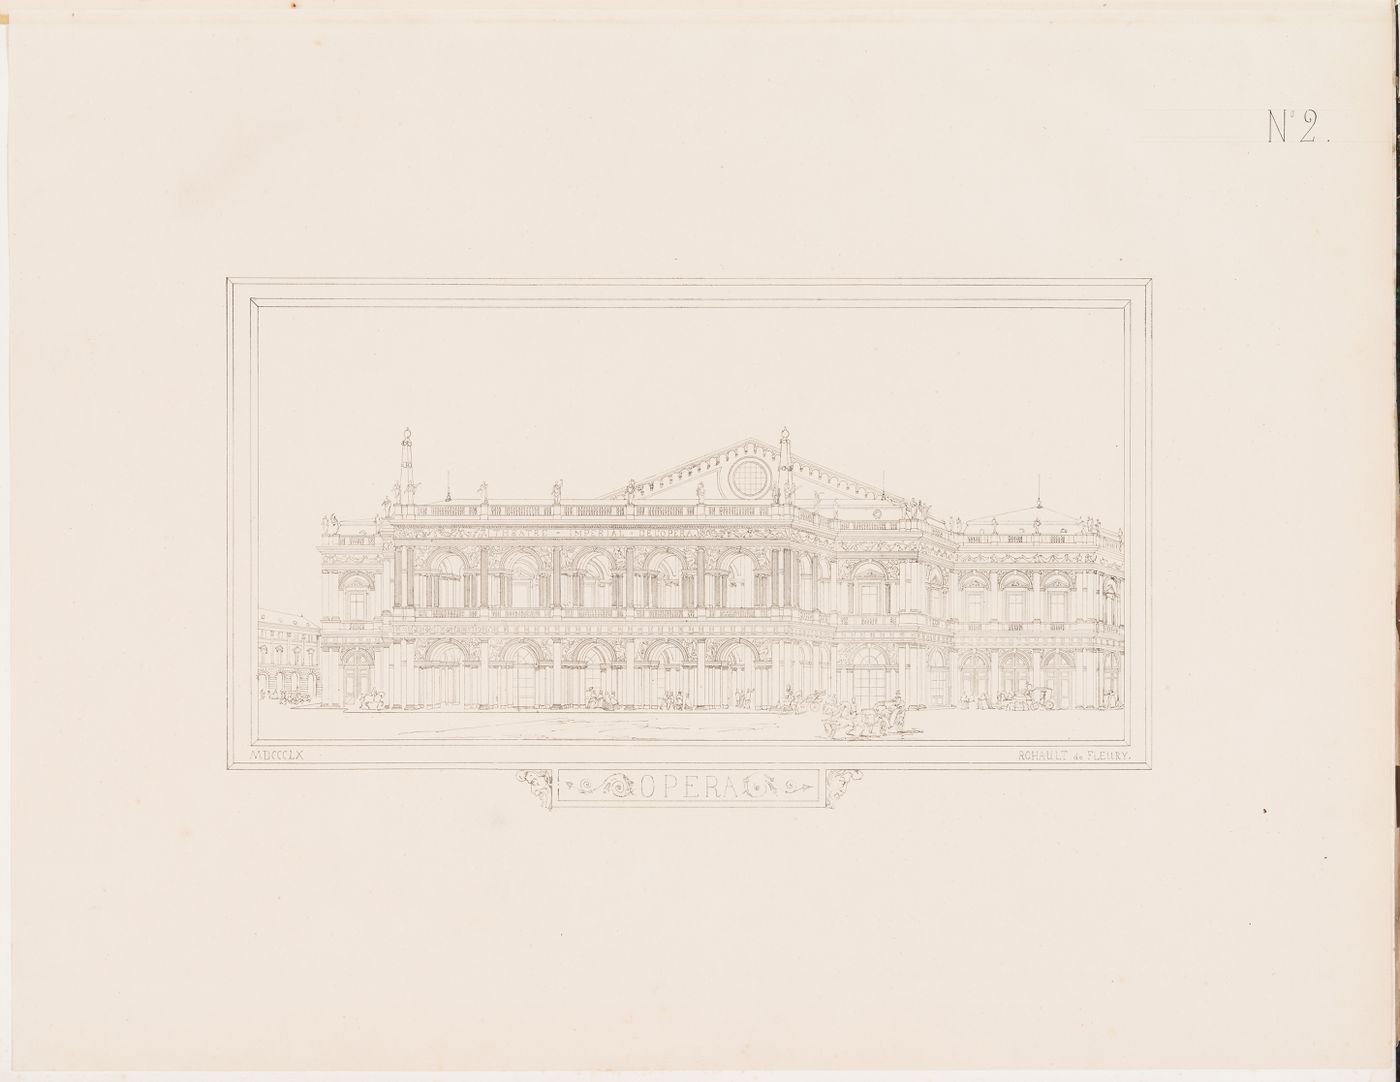 Project for an opera house for the Théâtre impérial de l'opéra: Perspective view